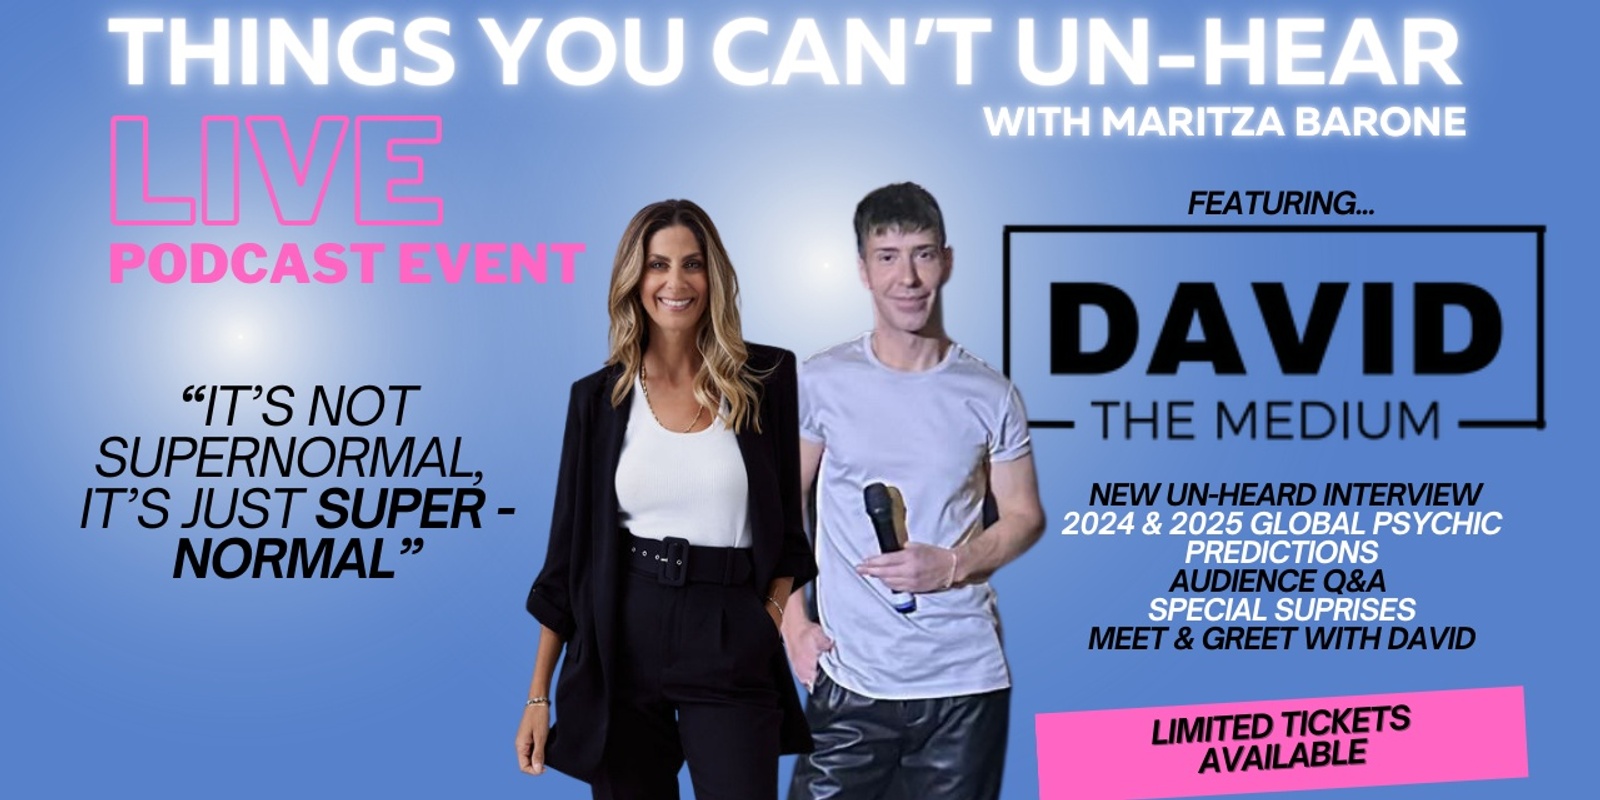 Banner image for Things You Can't Un-Hear LIVE with Maritza Barone & David The Medium